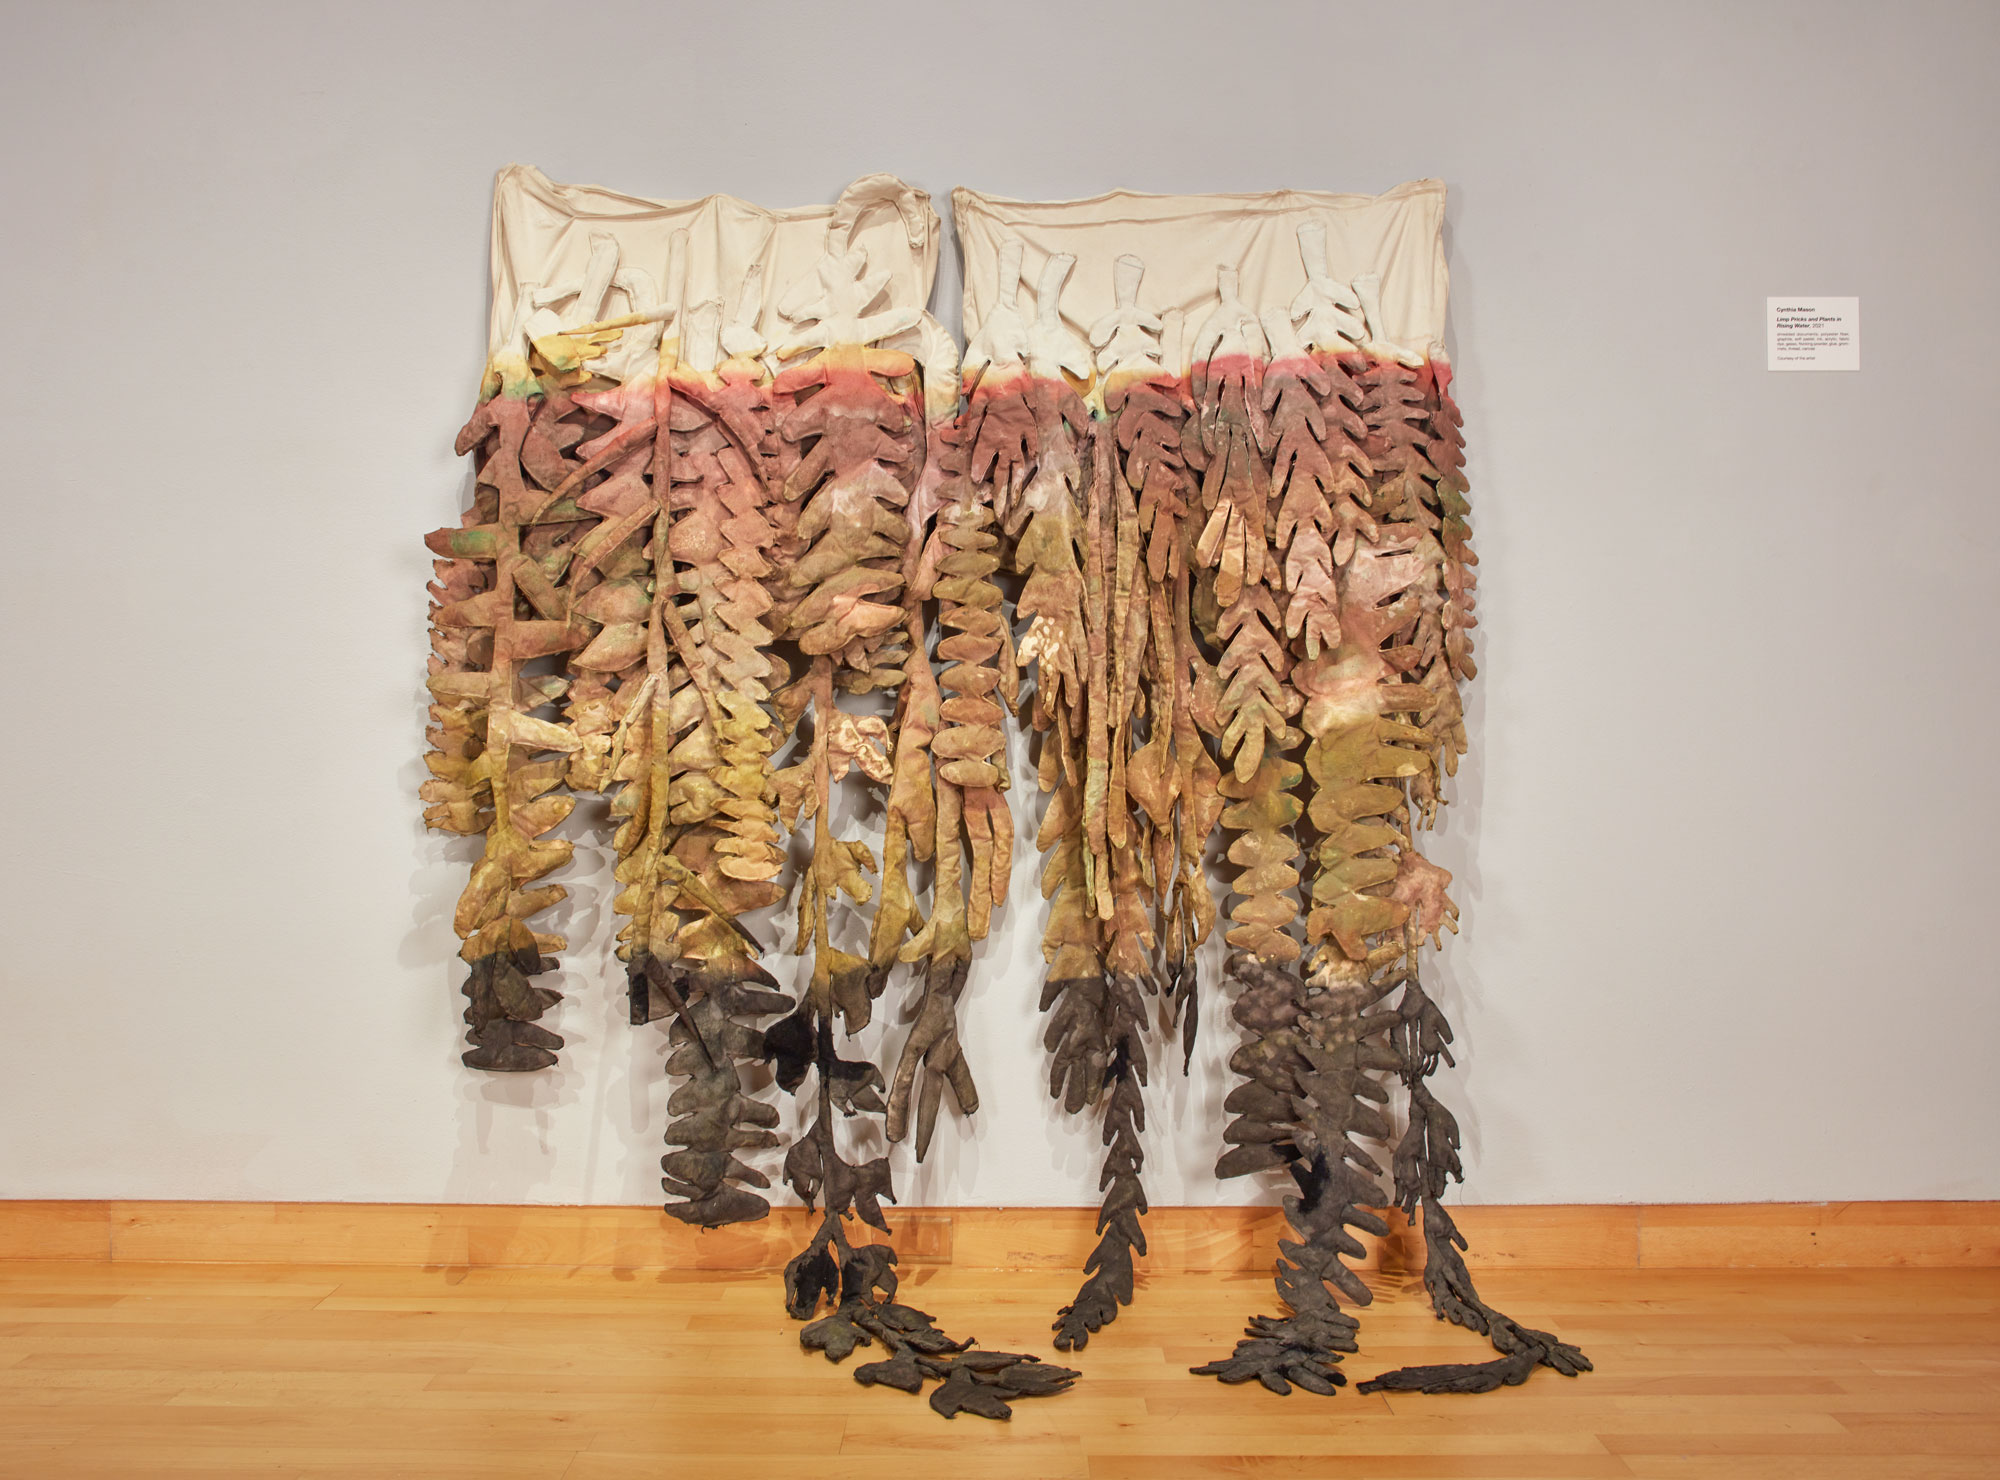 Cynthia Mason, Limp Pricks and Plants in Rising Water, 2021. shredded documents, polyester fiber, graphite, soft pastel, ink, acrylic, fabric dye, gesso, flocking powder, glue, grommets, thread, canvas. 68 x 64 x 25 in. Courtesy of the artist. Installation view of Skyway 20/21 exhibition at USF Contemporary Art Museum. Photo: Will Lytch.